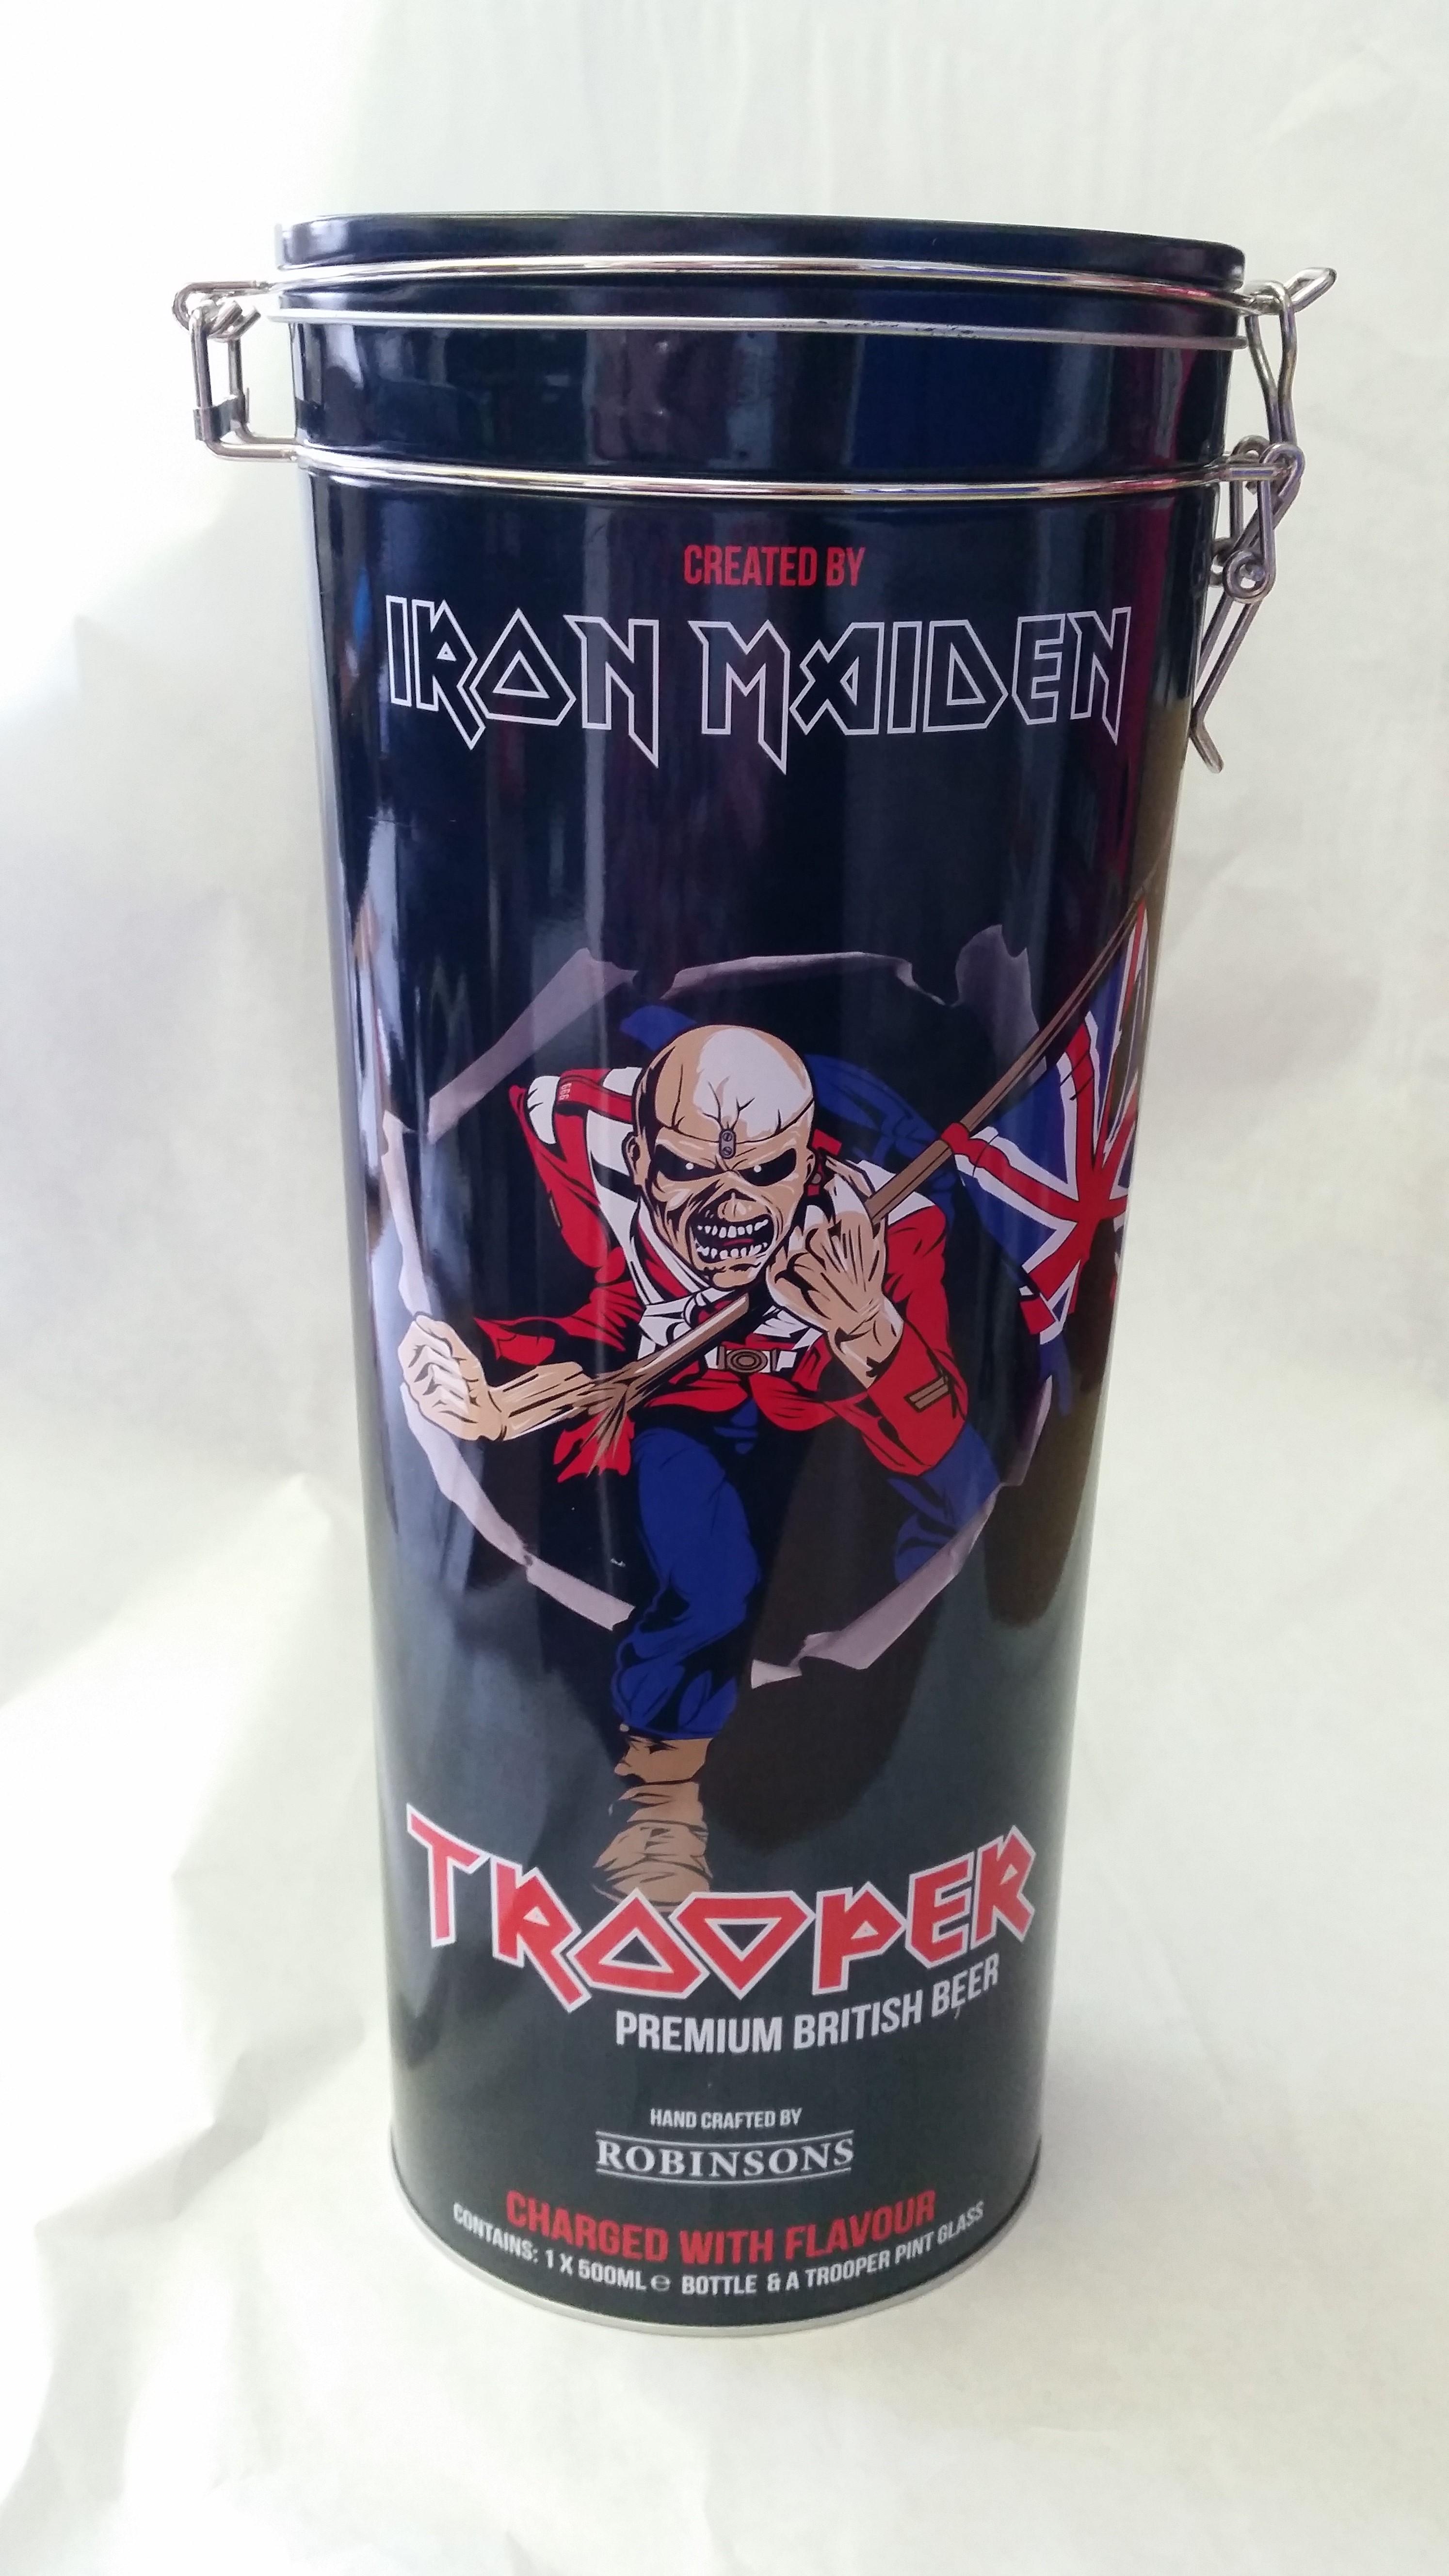 POP MUSIC, commemorative beer in metal tin, Iron Maiden, by Robertsons Brewery of Stockport, with